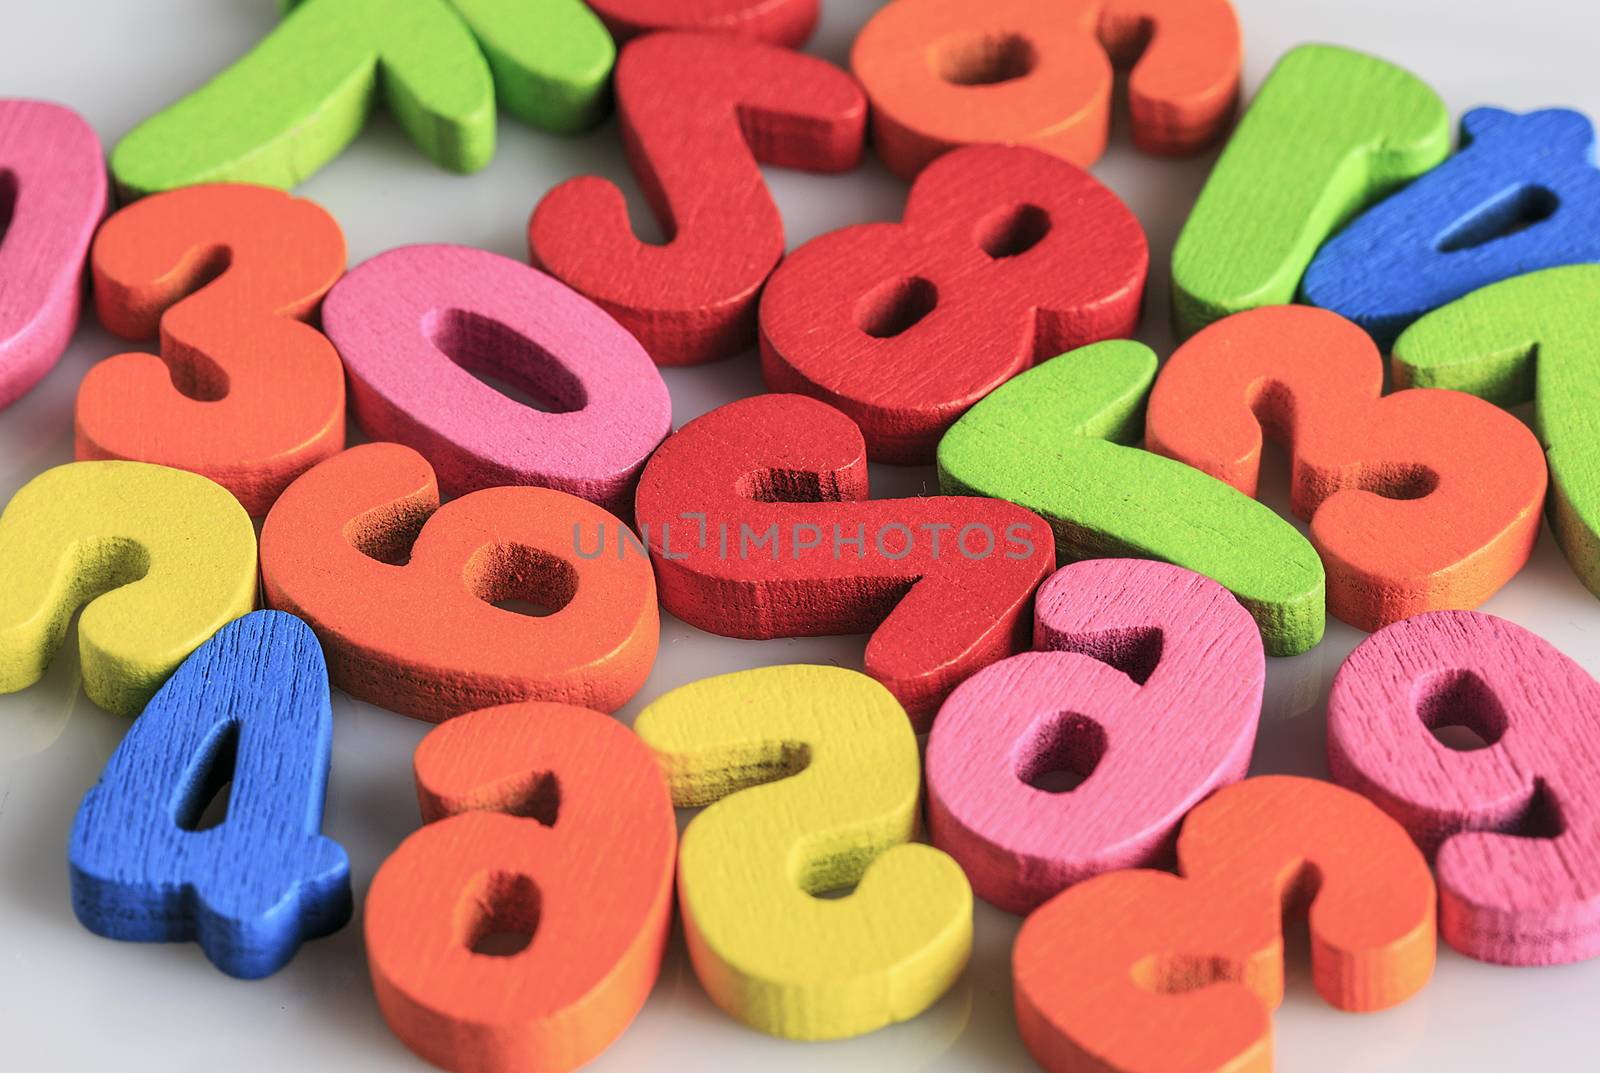 Group of colored wooden numbers by nachrc2001